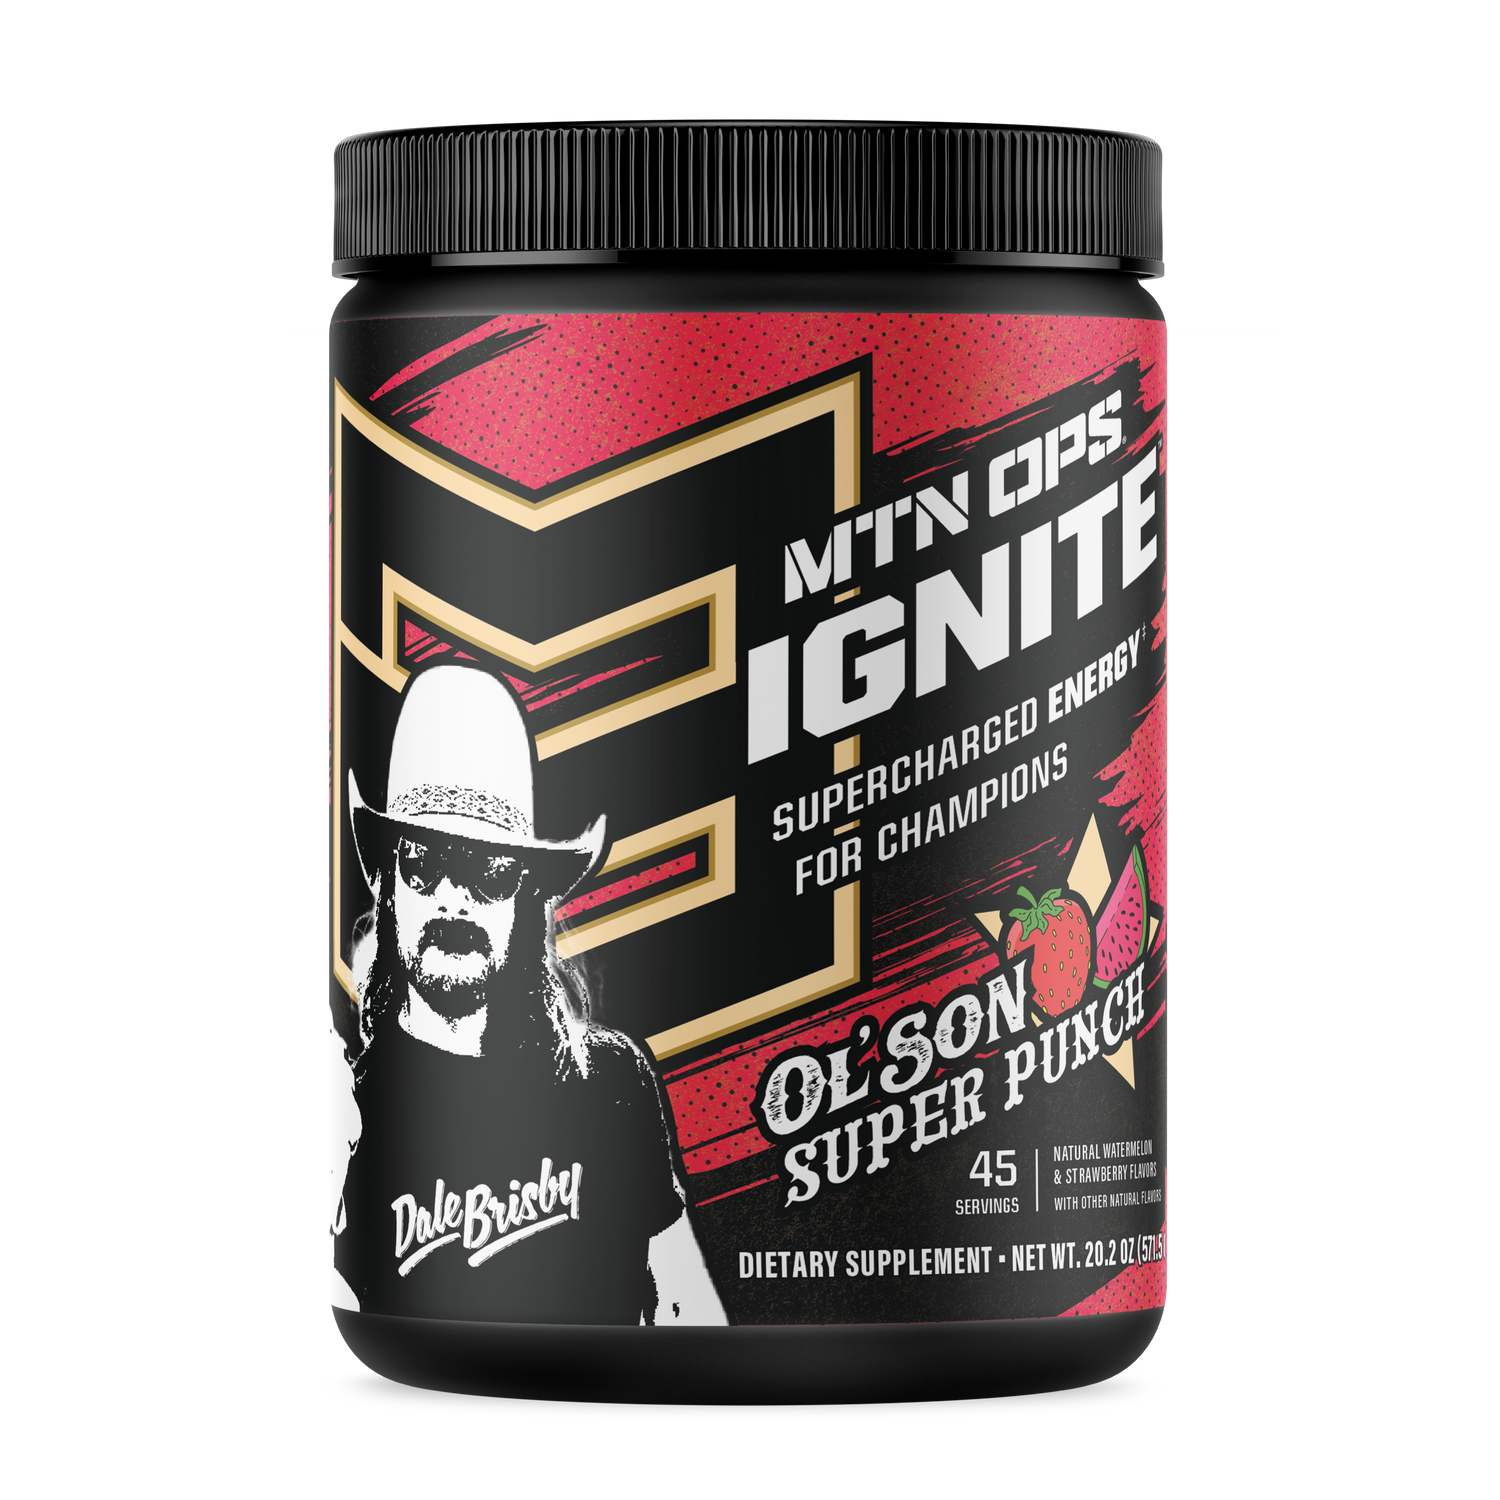 MTN OPS Ignite in  by GOHUNT | Mtn Ops - GOHUNT Shop